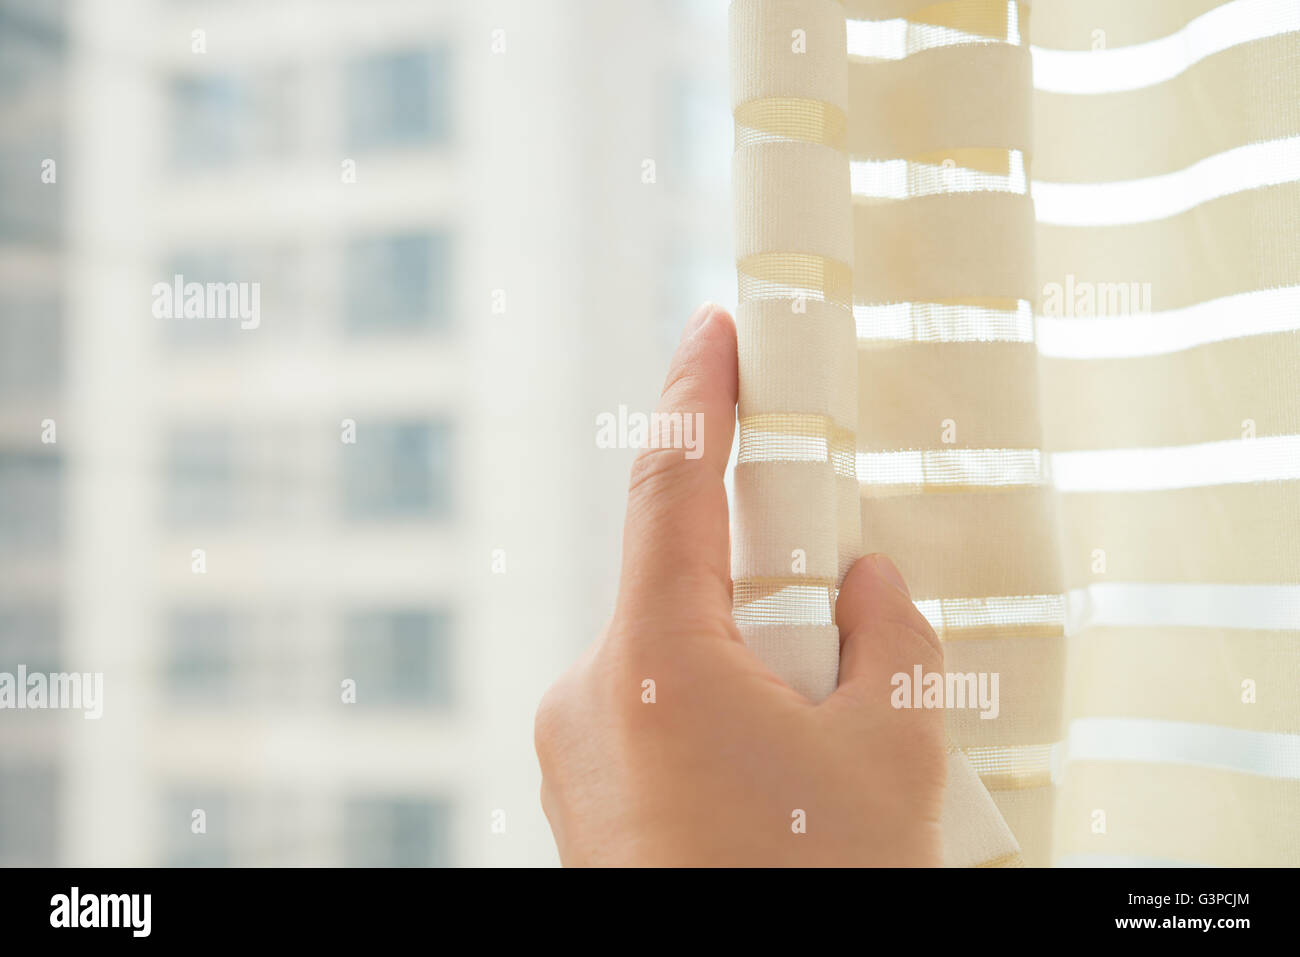 man gently opening the curtain in the bed room Stock Photo